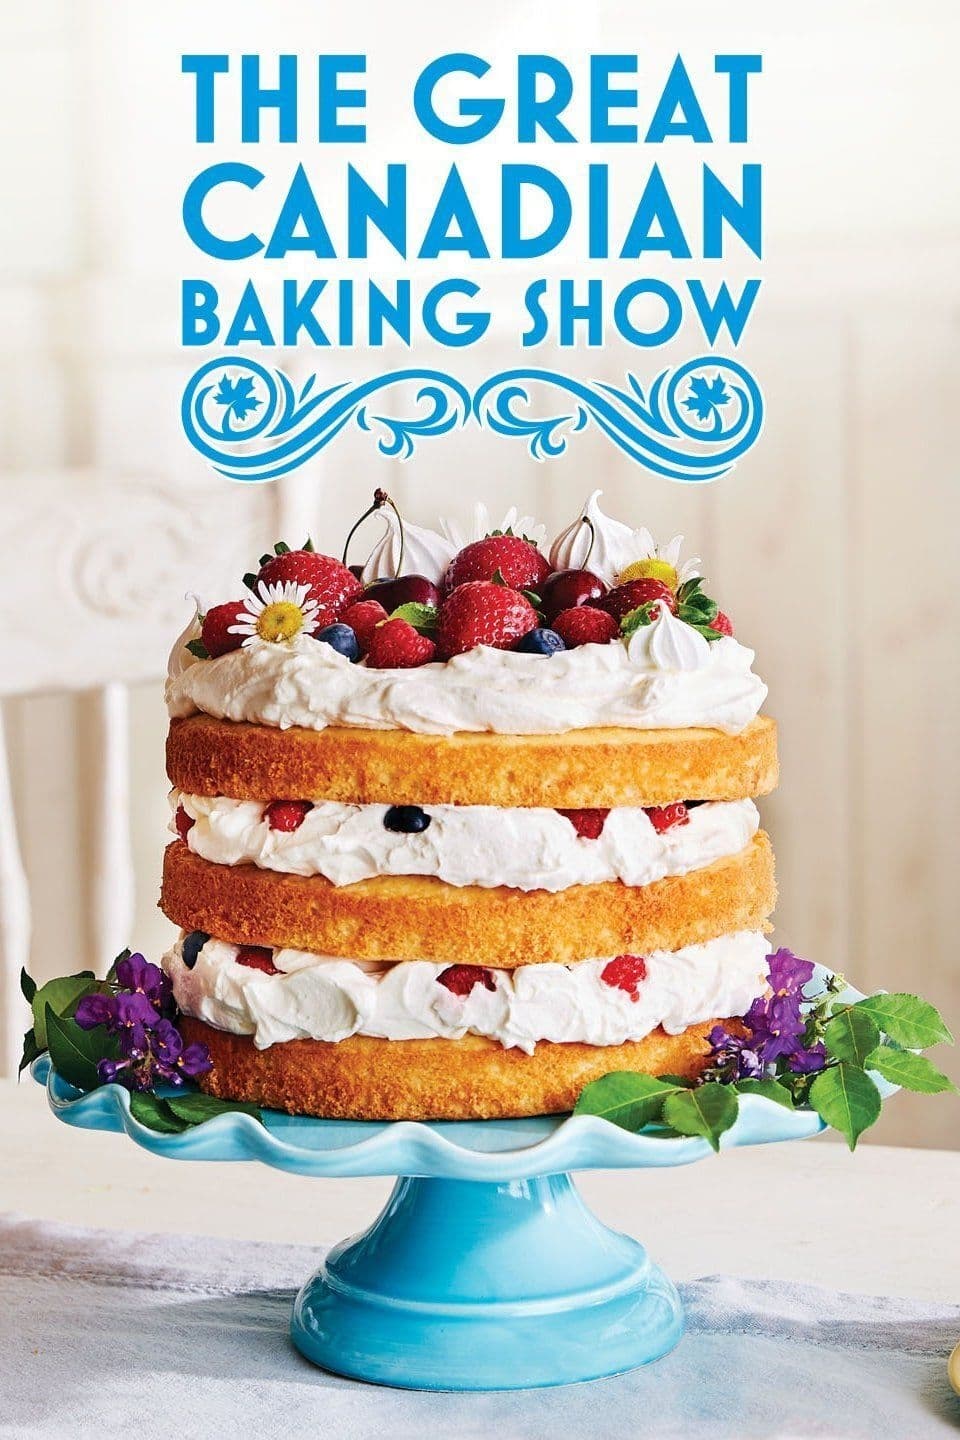 The Great Canadian Baking Show poster